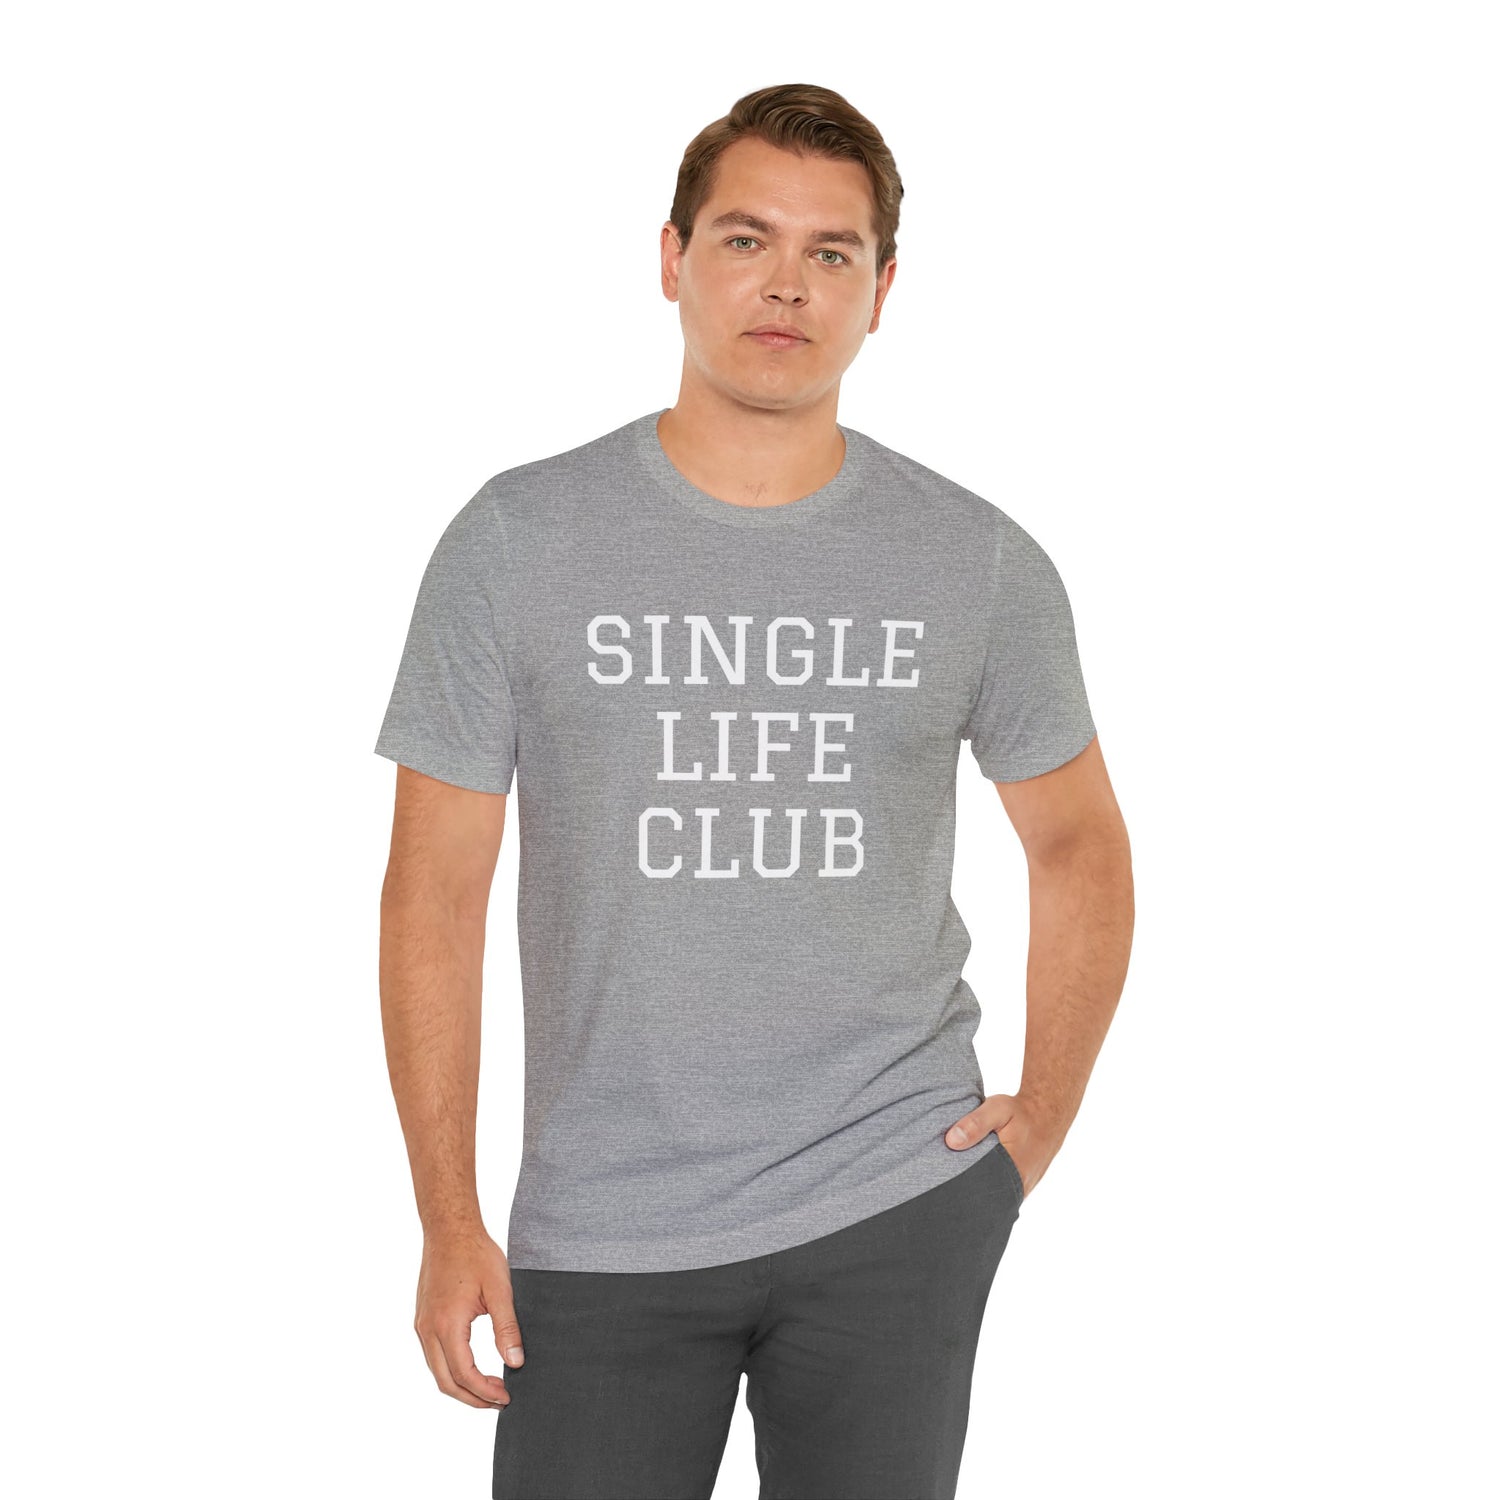 Adventures Casual Wear Celebrate Choice Confidence Cotton Crew neck Customer Satisfaction Empowerment Extraordinary Life Freedom Humor Independence Laughter Loungewear Personal Growth Proud Singles Pursue Passions Quality Self-Love Single Friends Single Life Single Life Apparel Single Status Social Events Solo Journey Solo Life T-shirts Unique Gift Unisex